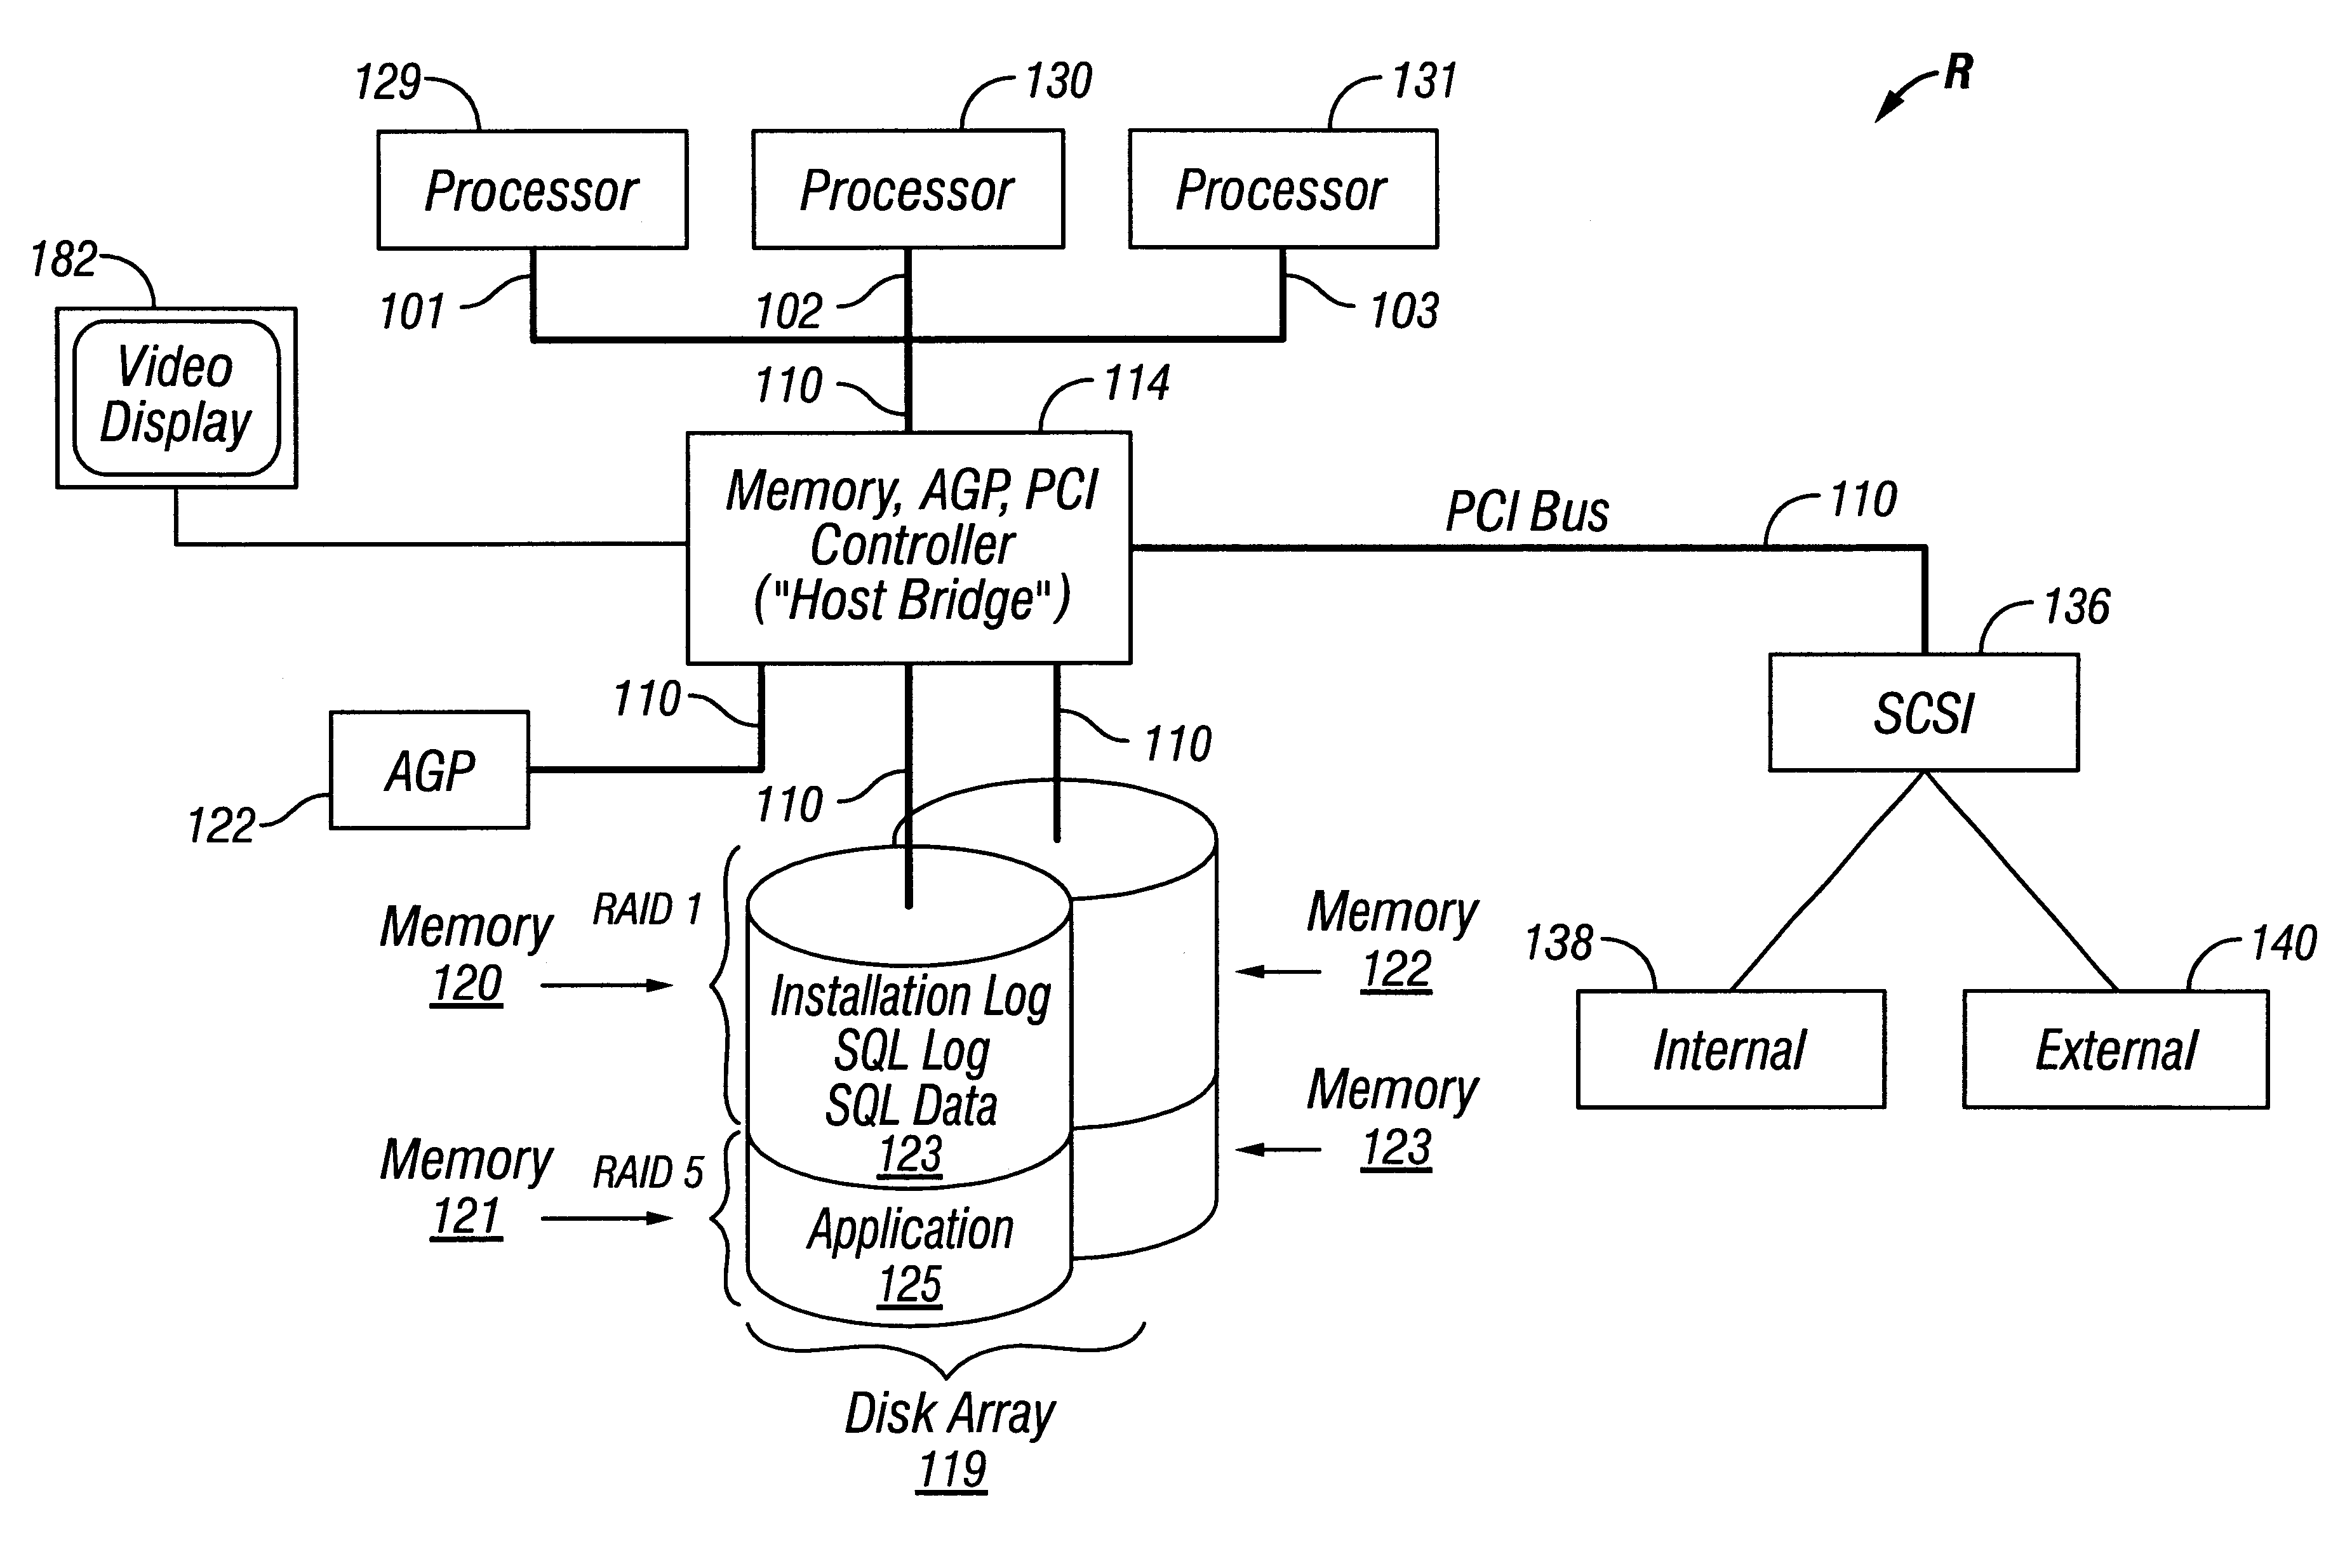 System for describing and storing descriptions of hierachical structures using hardware definition files to specify performance, characteristics, part number and name of hardware components